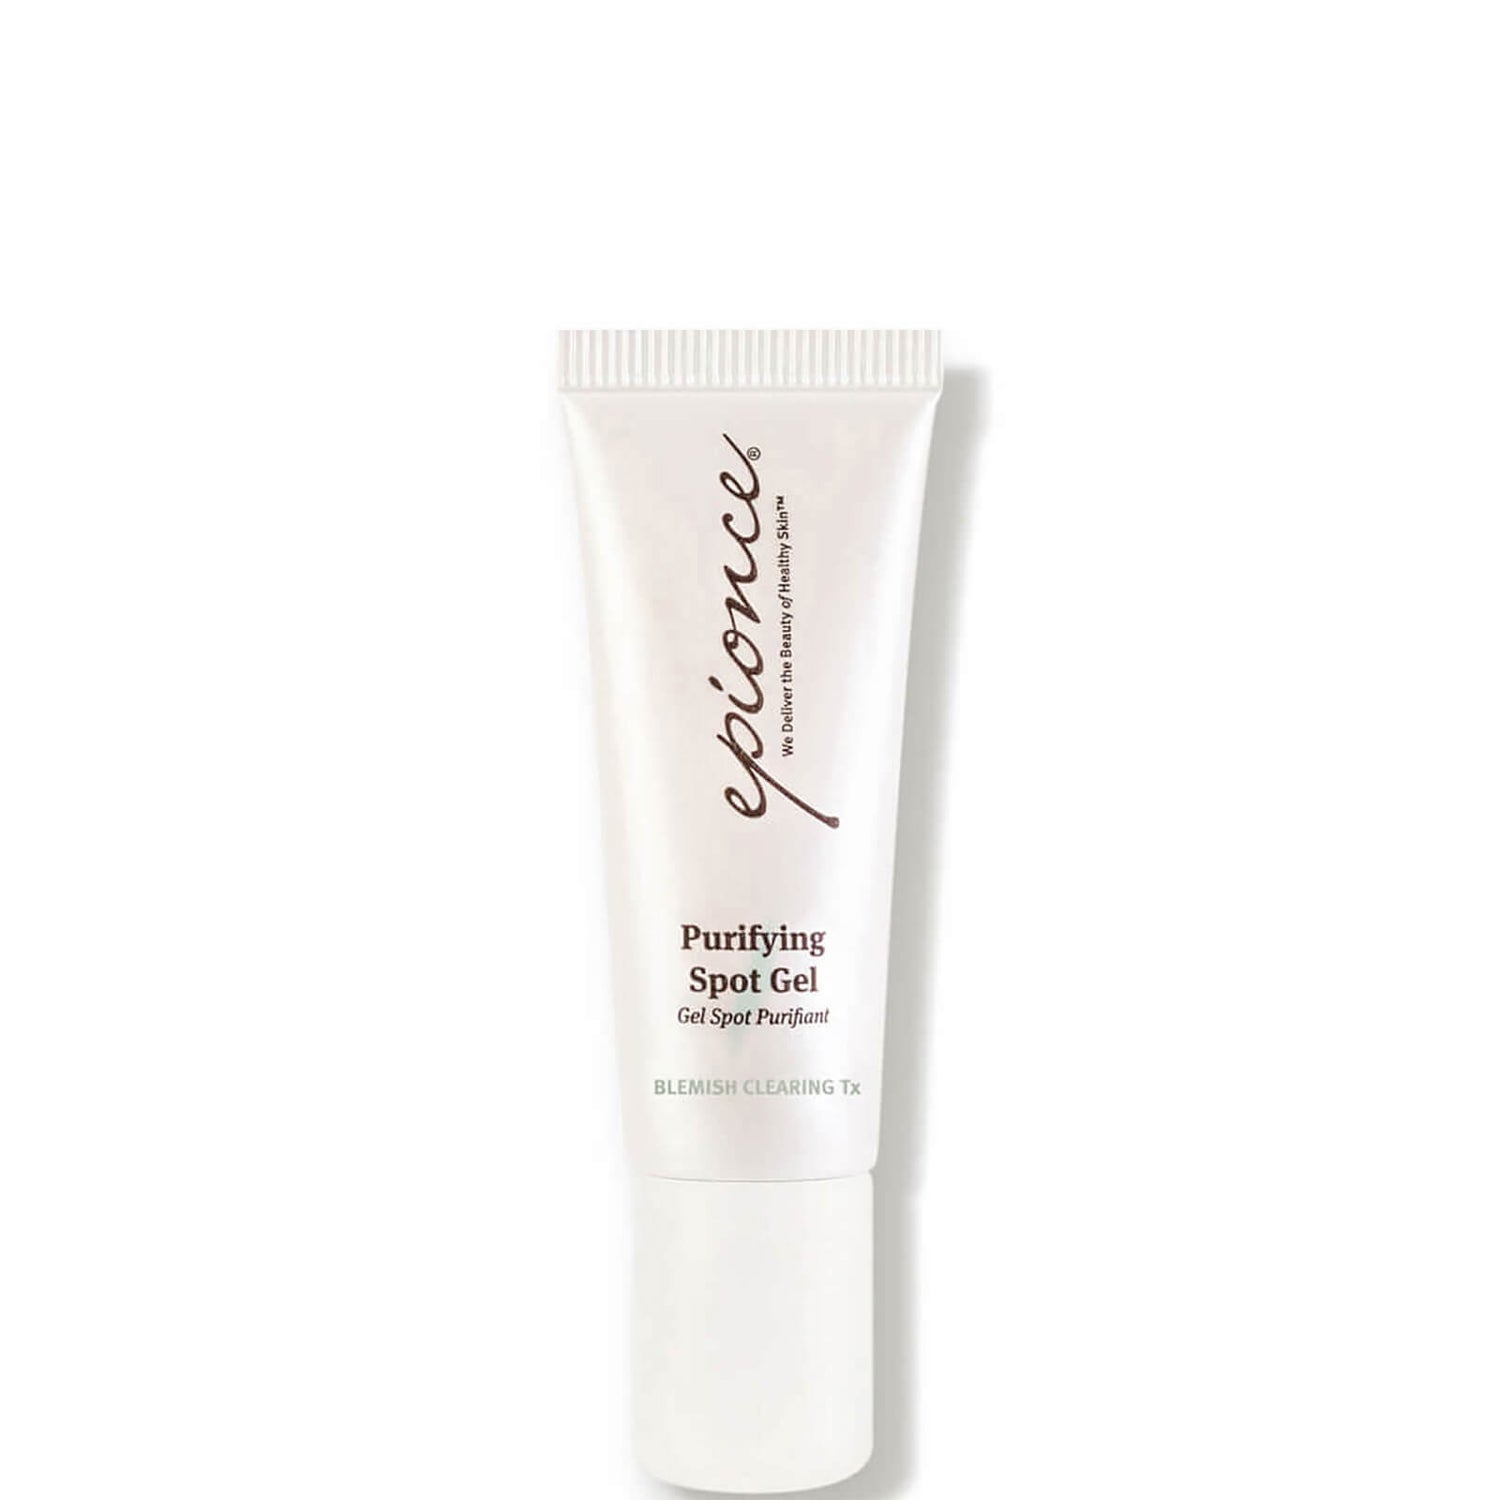 Epionce Purifying Spot Gel Blemish Clearing Tx (10 ml.)